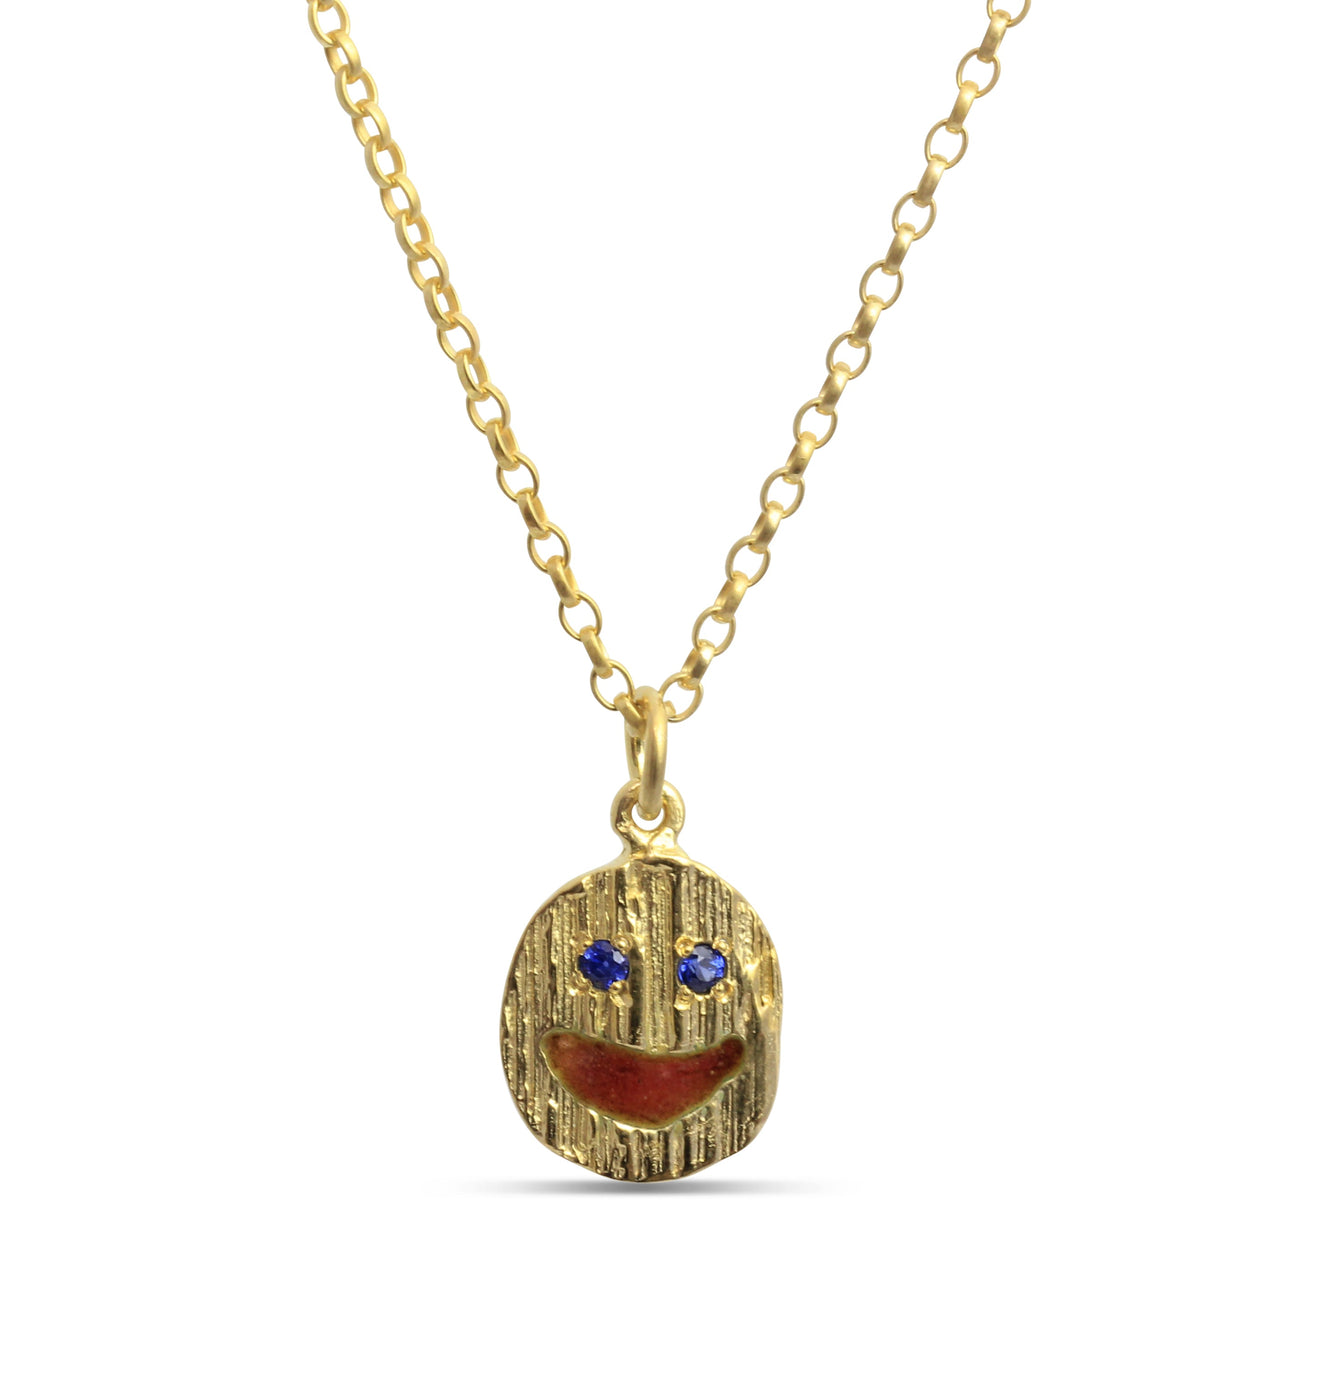 Eily O'Connell Smiley face portrait Necklace